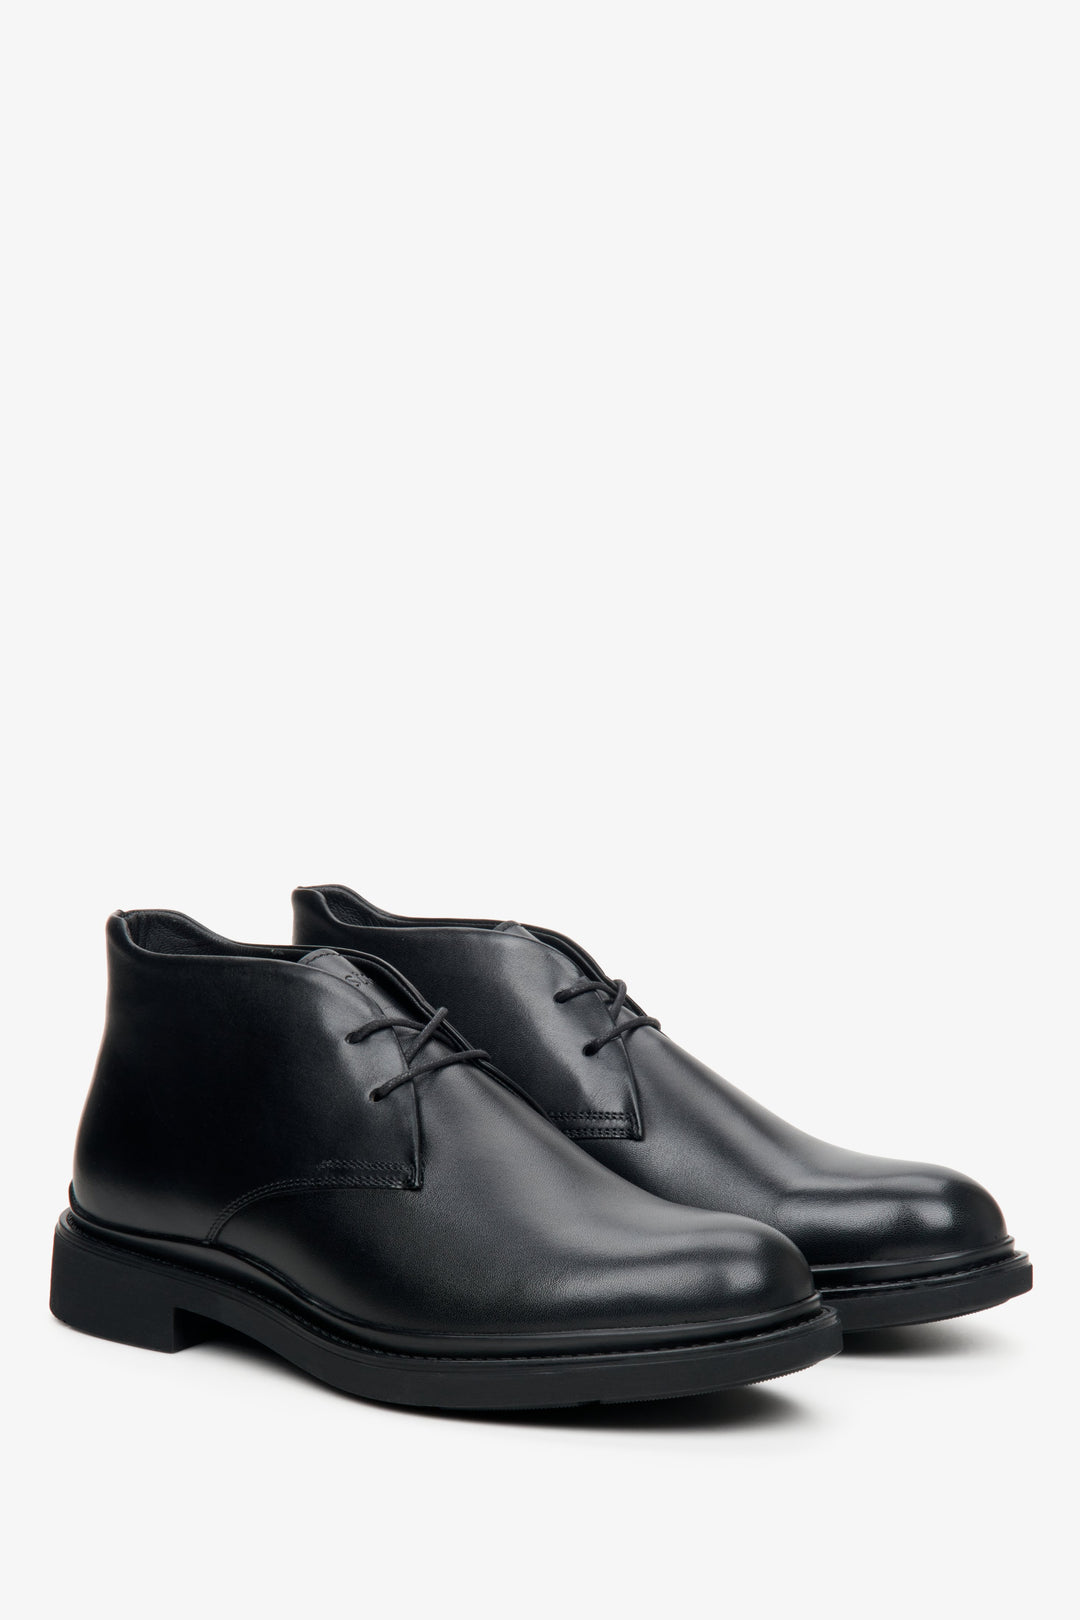 Men's black leather  boots with short lacing by Estro.